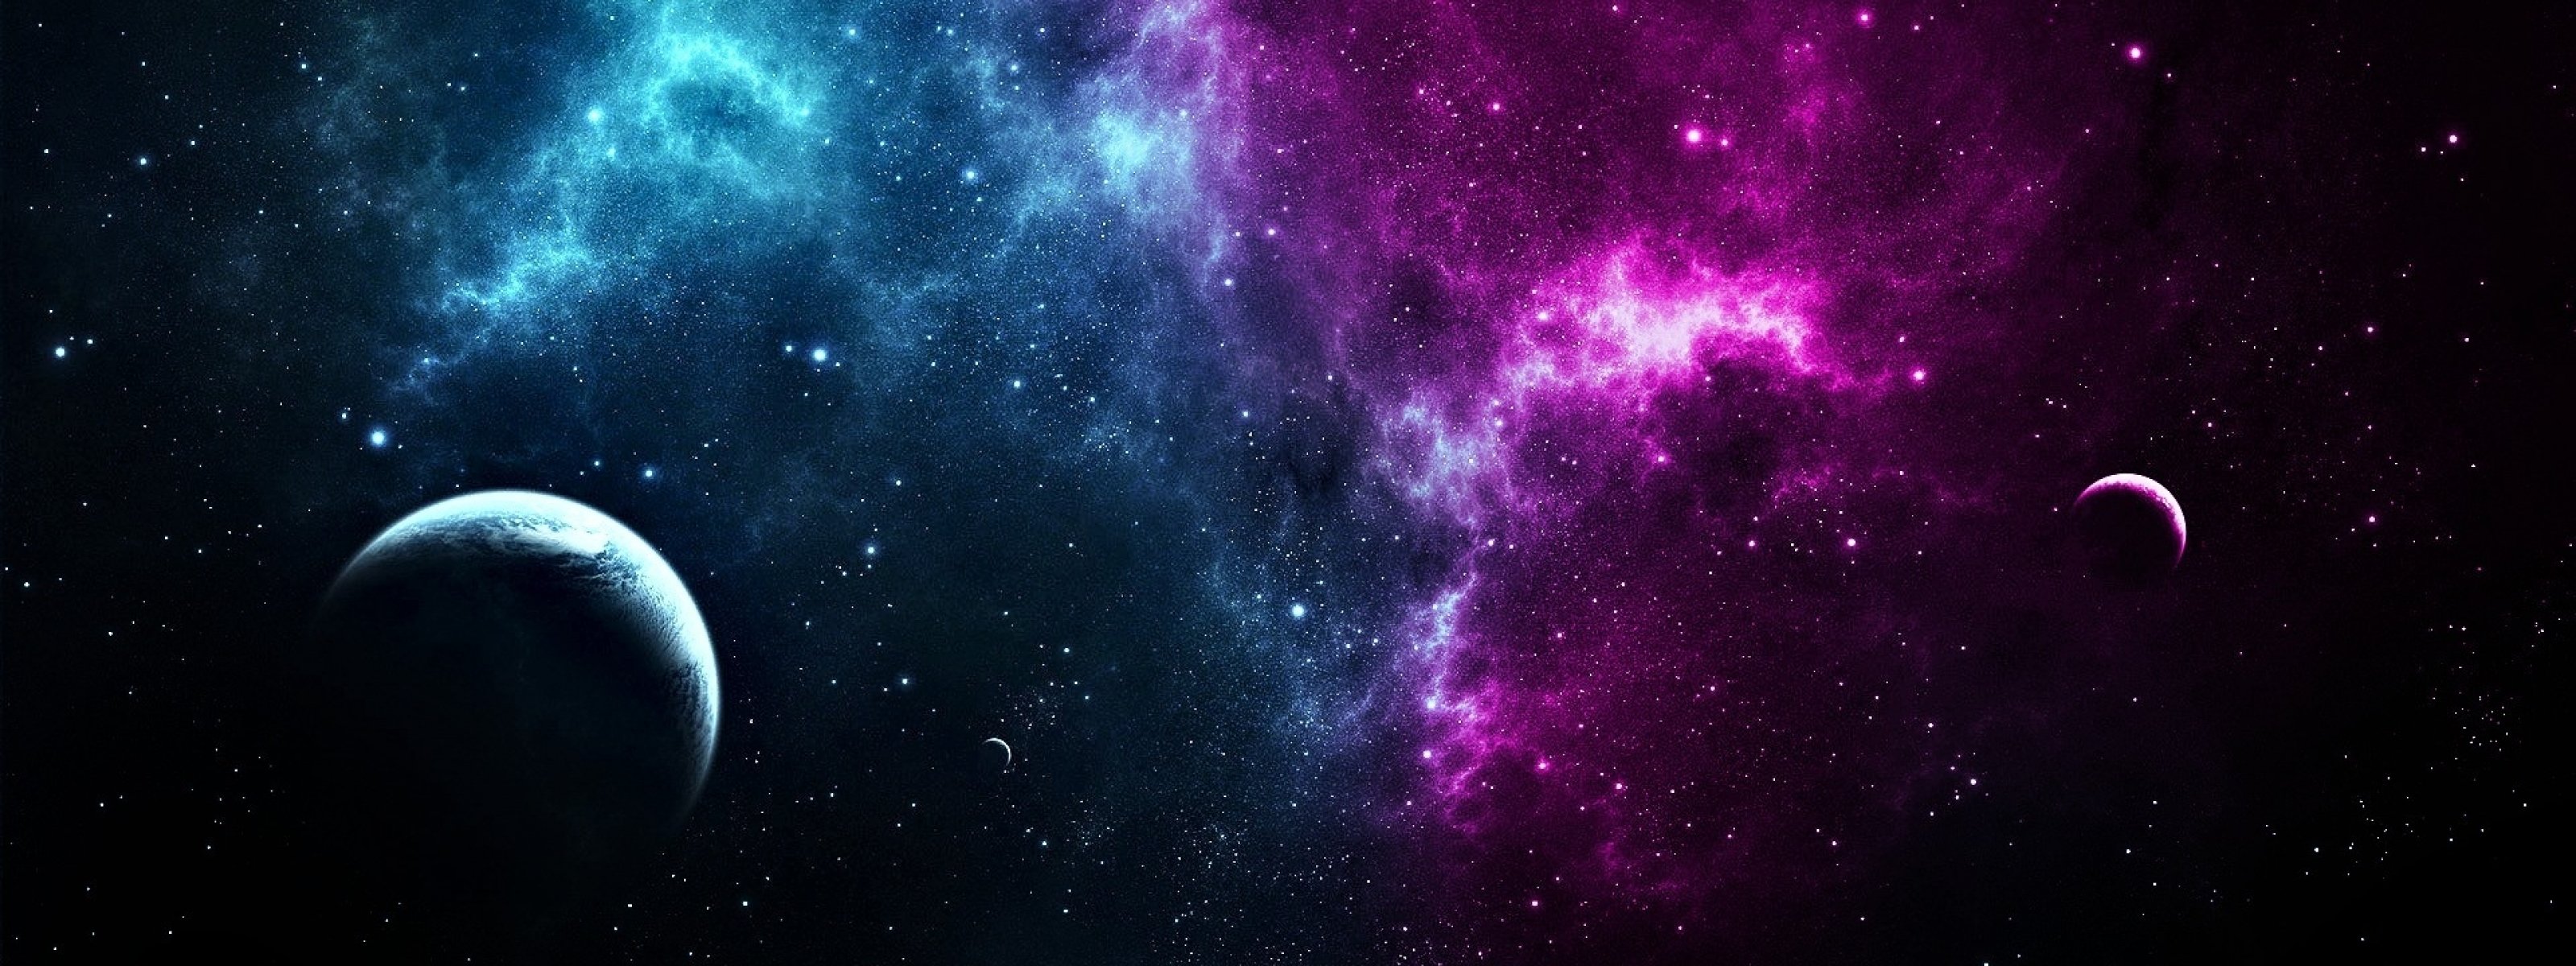 Dual Monitor Wallpaper K Space Dual Monitor Space X Wallpaper You Could Download